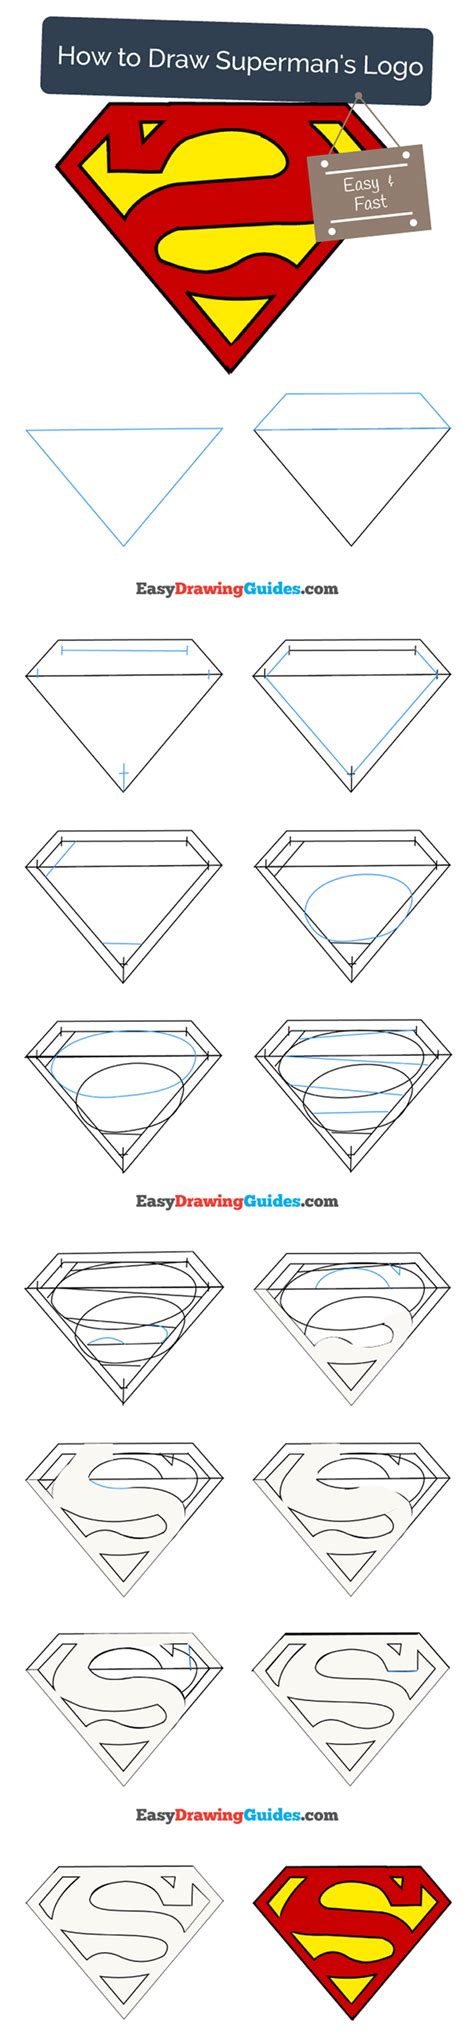 More images for how to draw tik tok logo step by step » How to Draw Superman Logo | Easy Step-by-Step Drawing ...